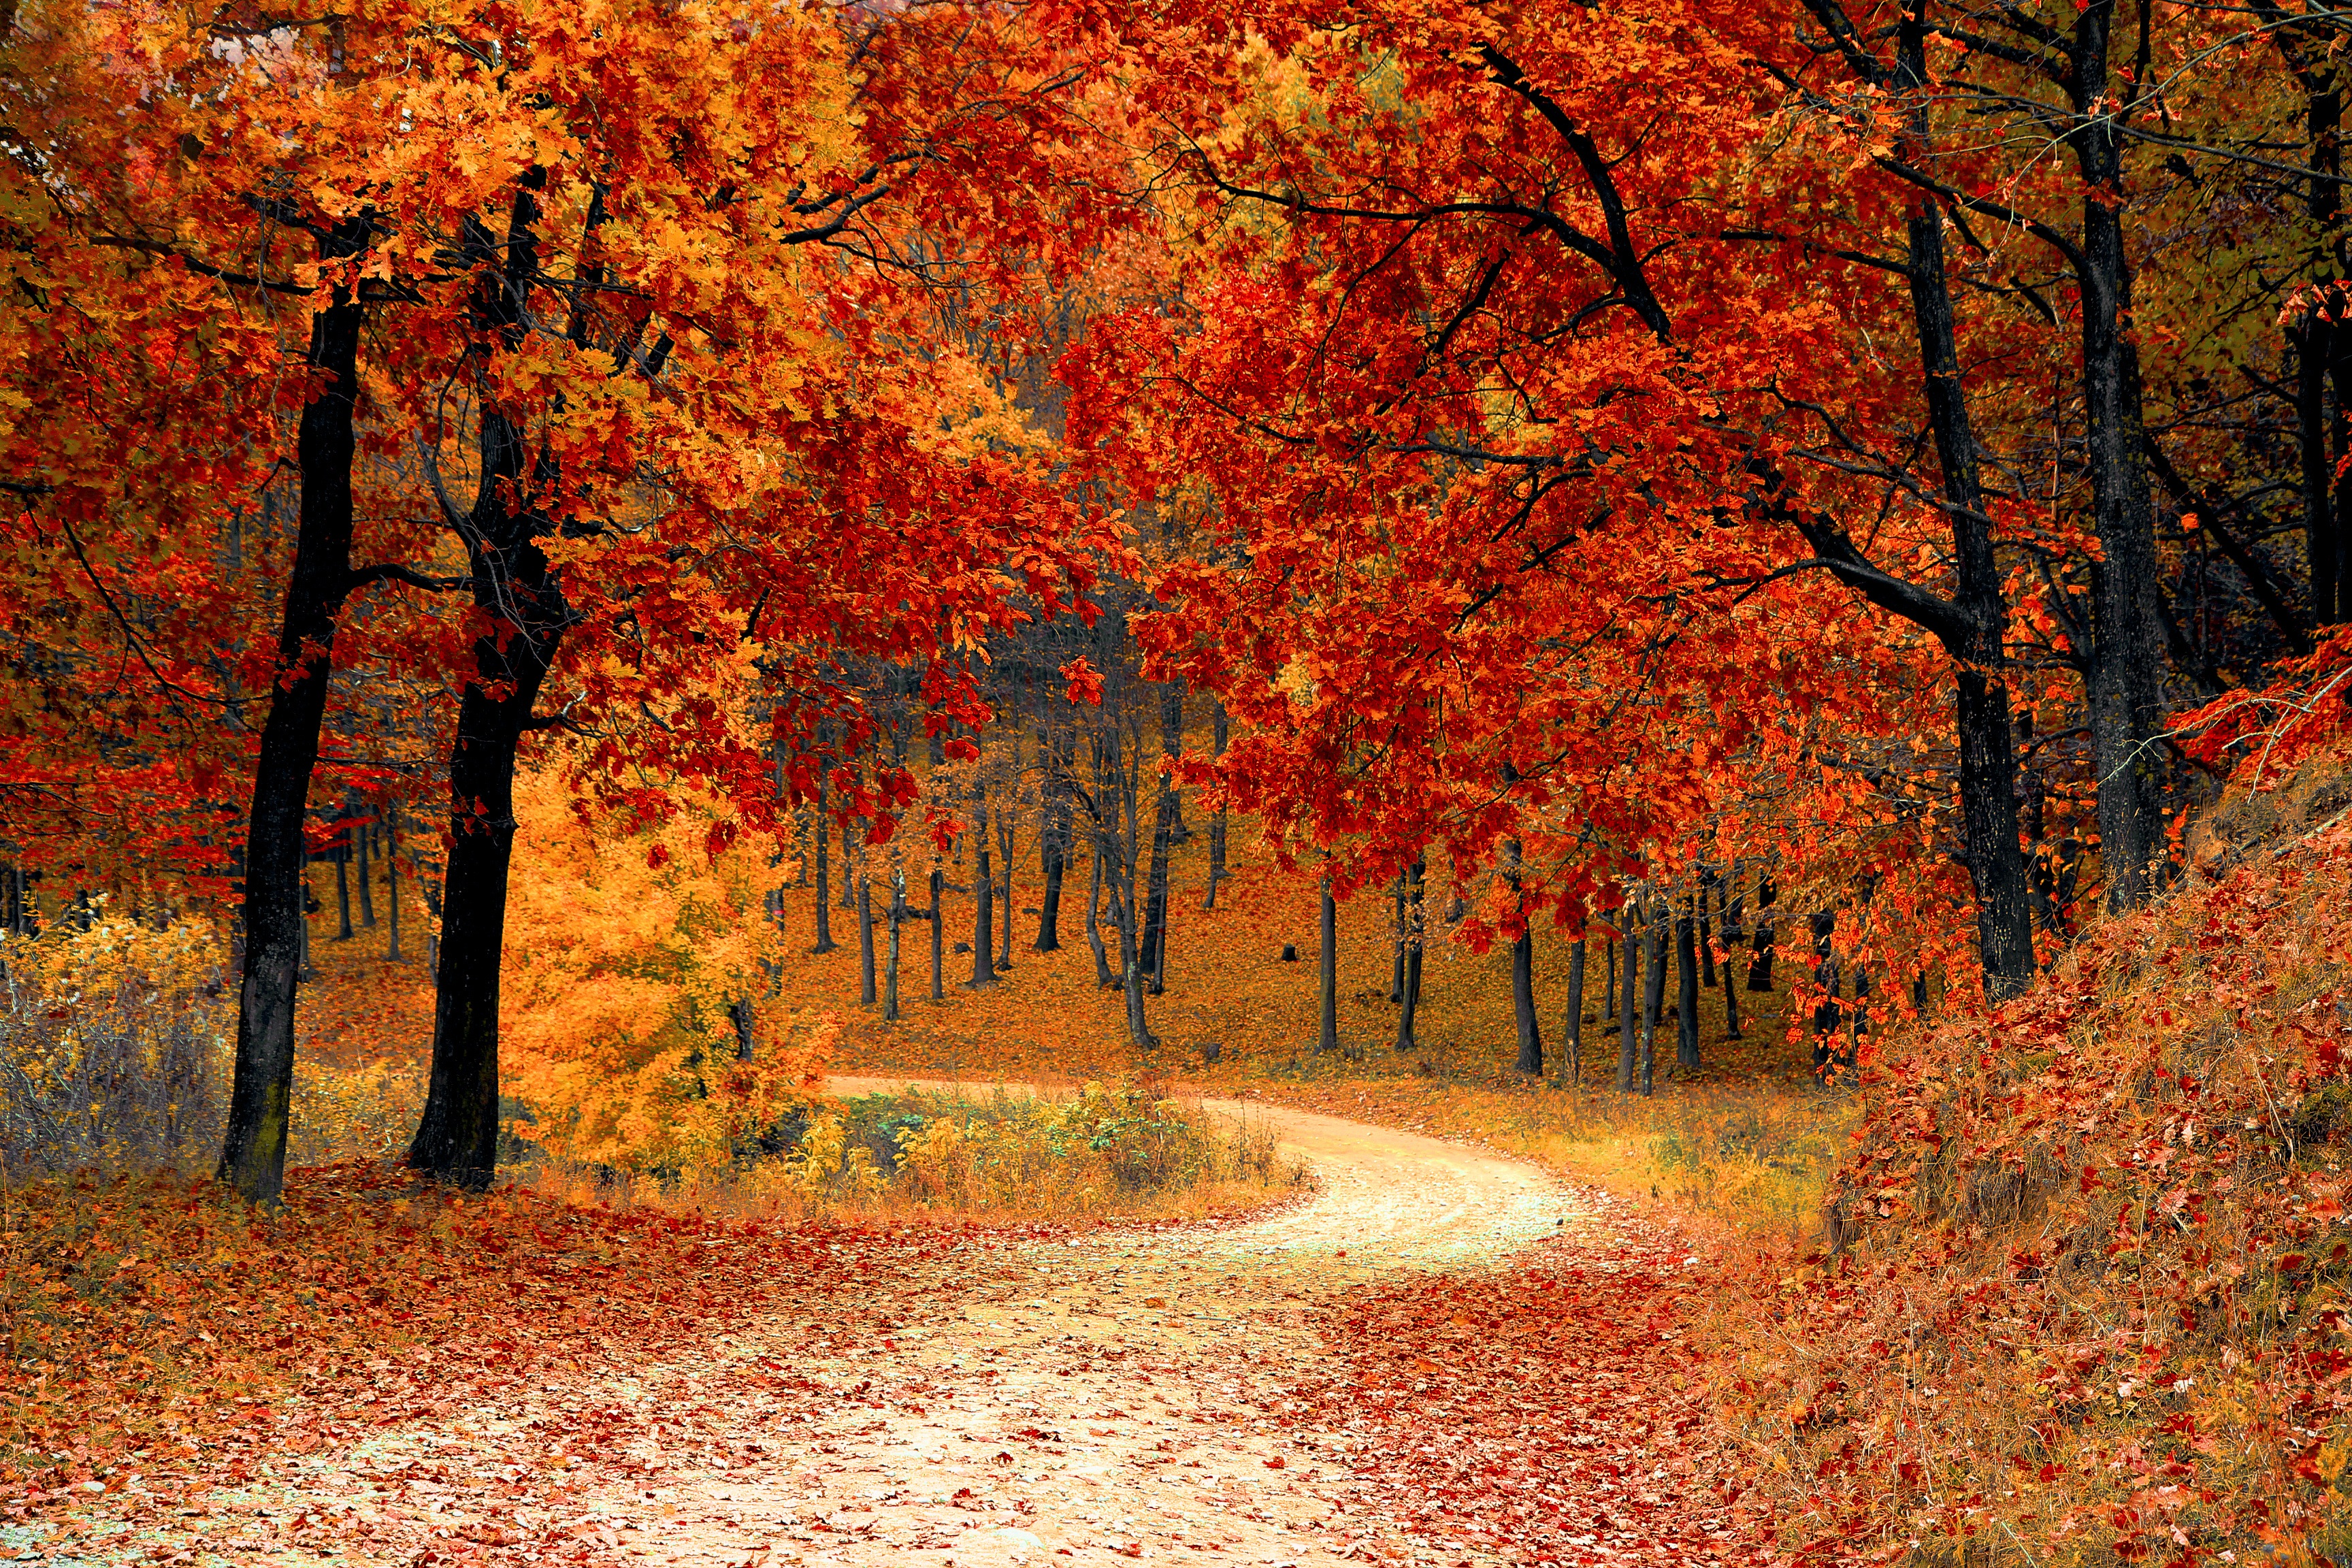 Fall for these Autumn safety tips